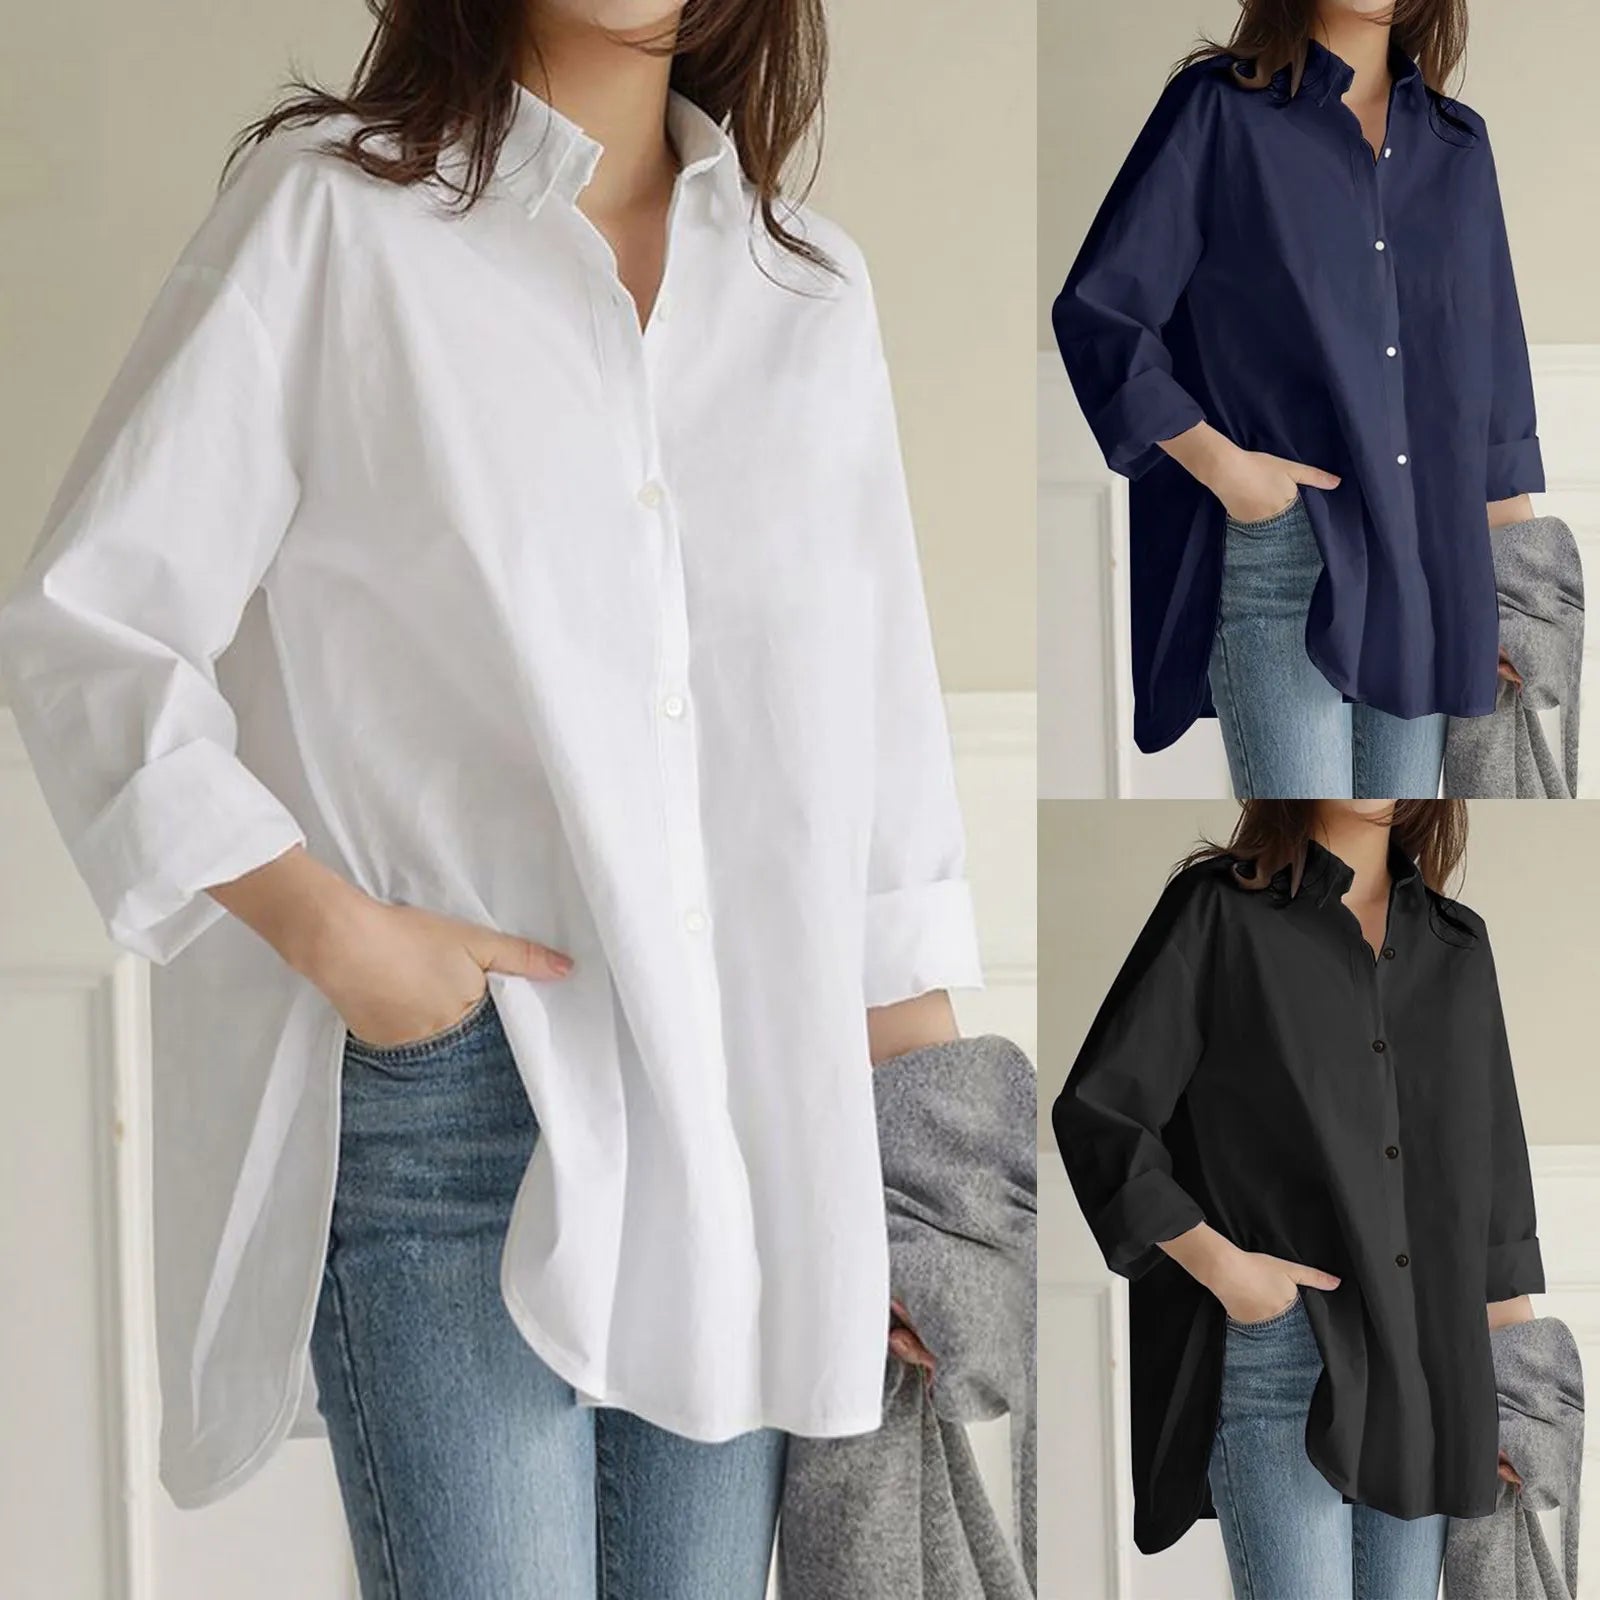 Casual Loose Long Shirt Women Solid Colour Oversize V-Neck Long Sleeve Button Top Shirt Blouse ropa mujer блузка женская 2023